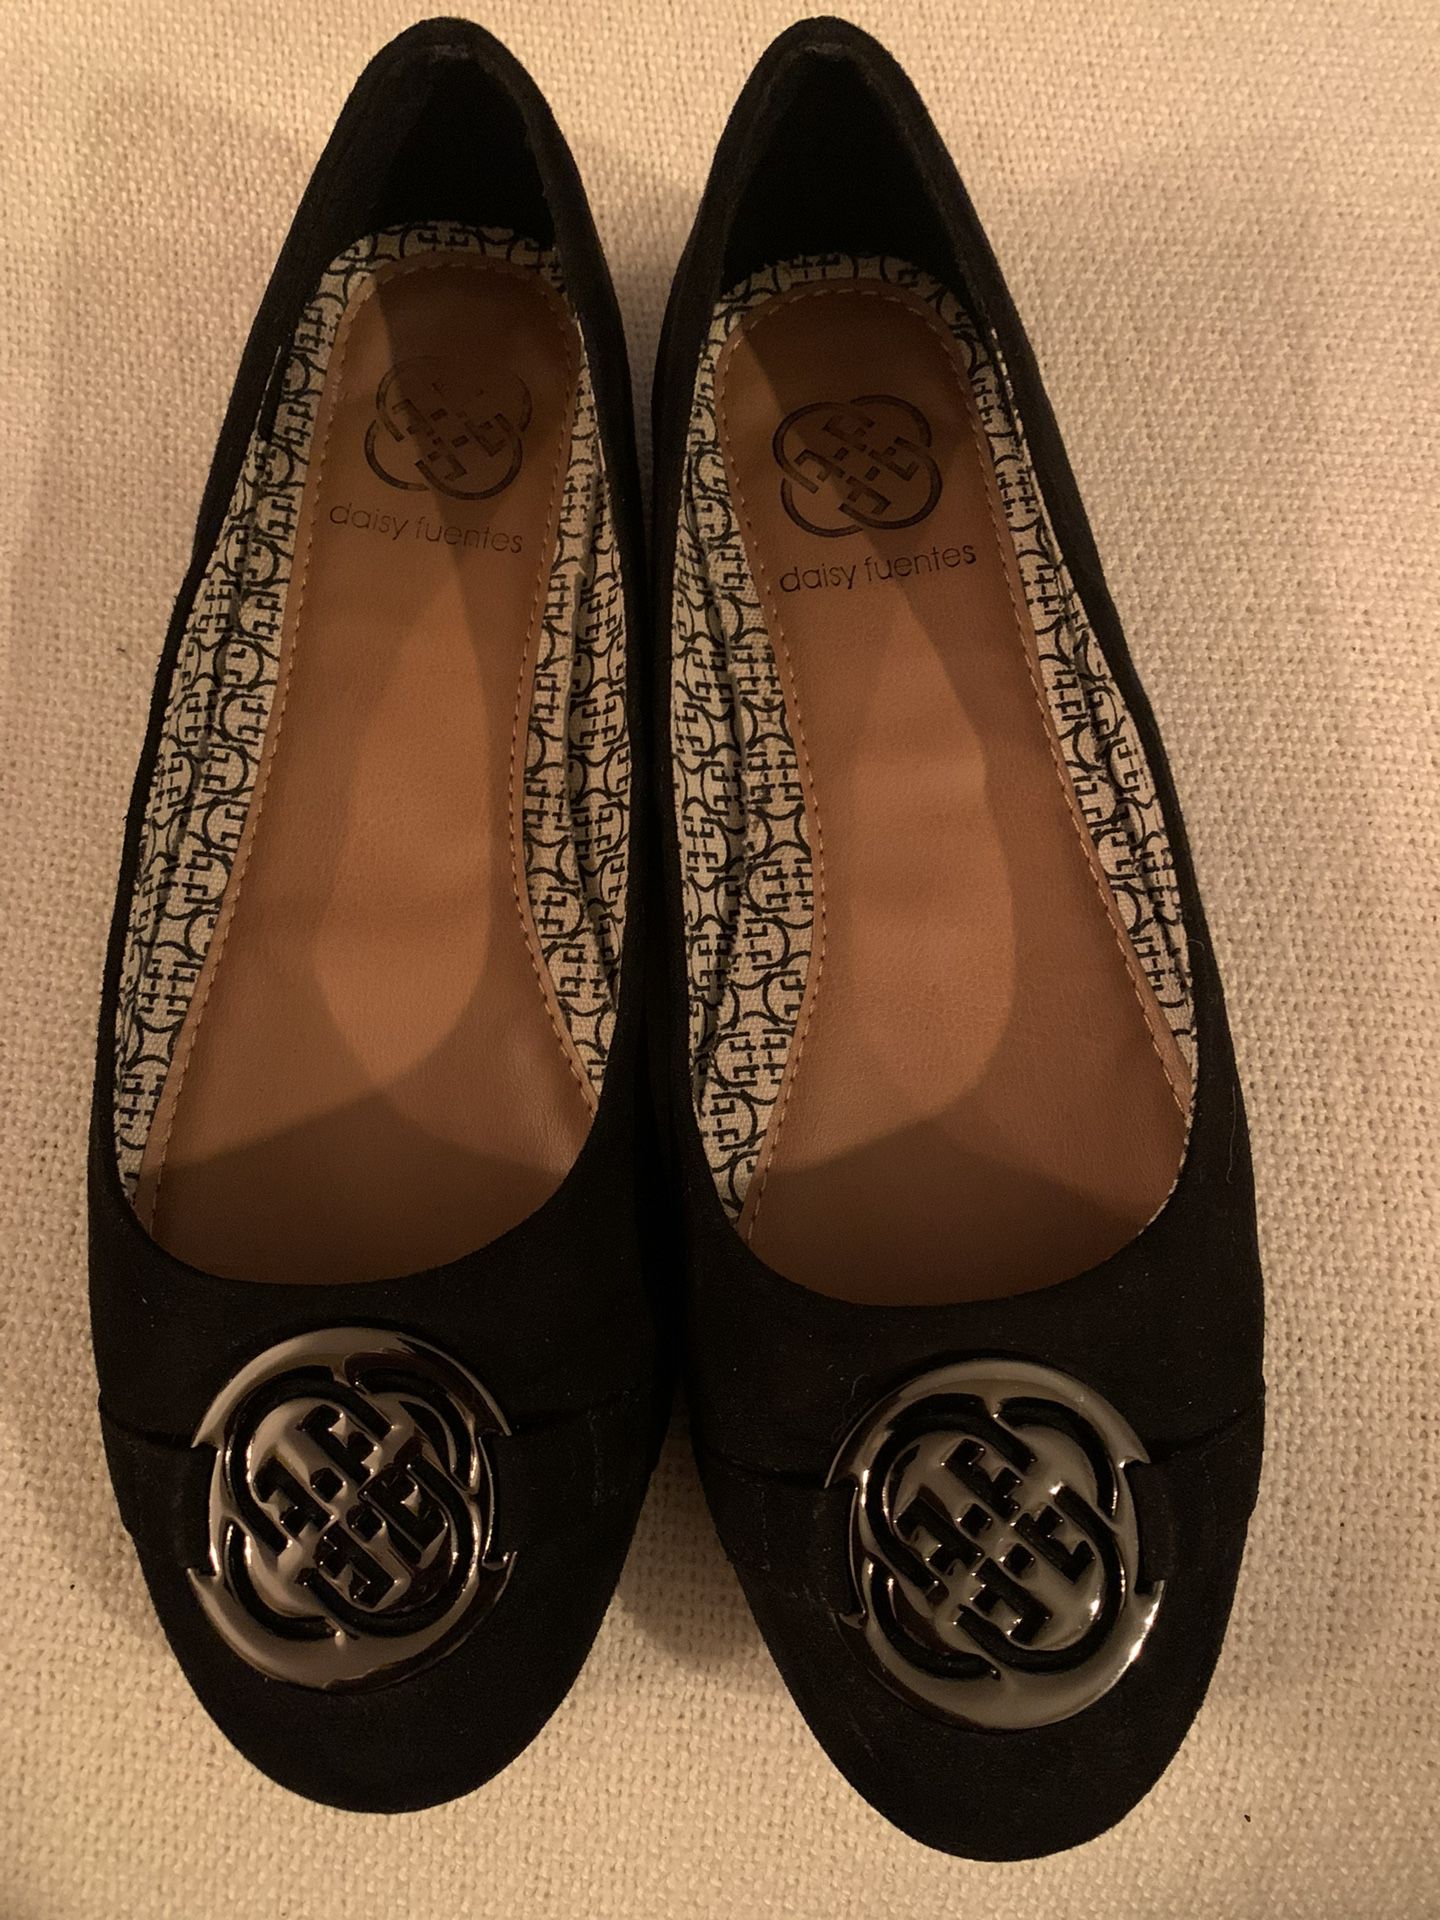 Black Flats size 7.5 by Daisy Fuentes